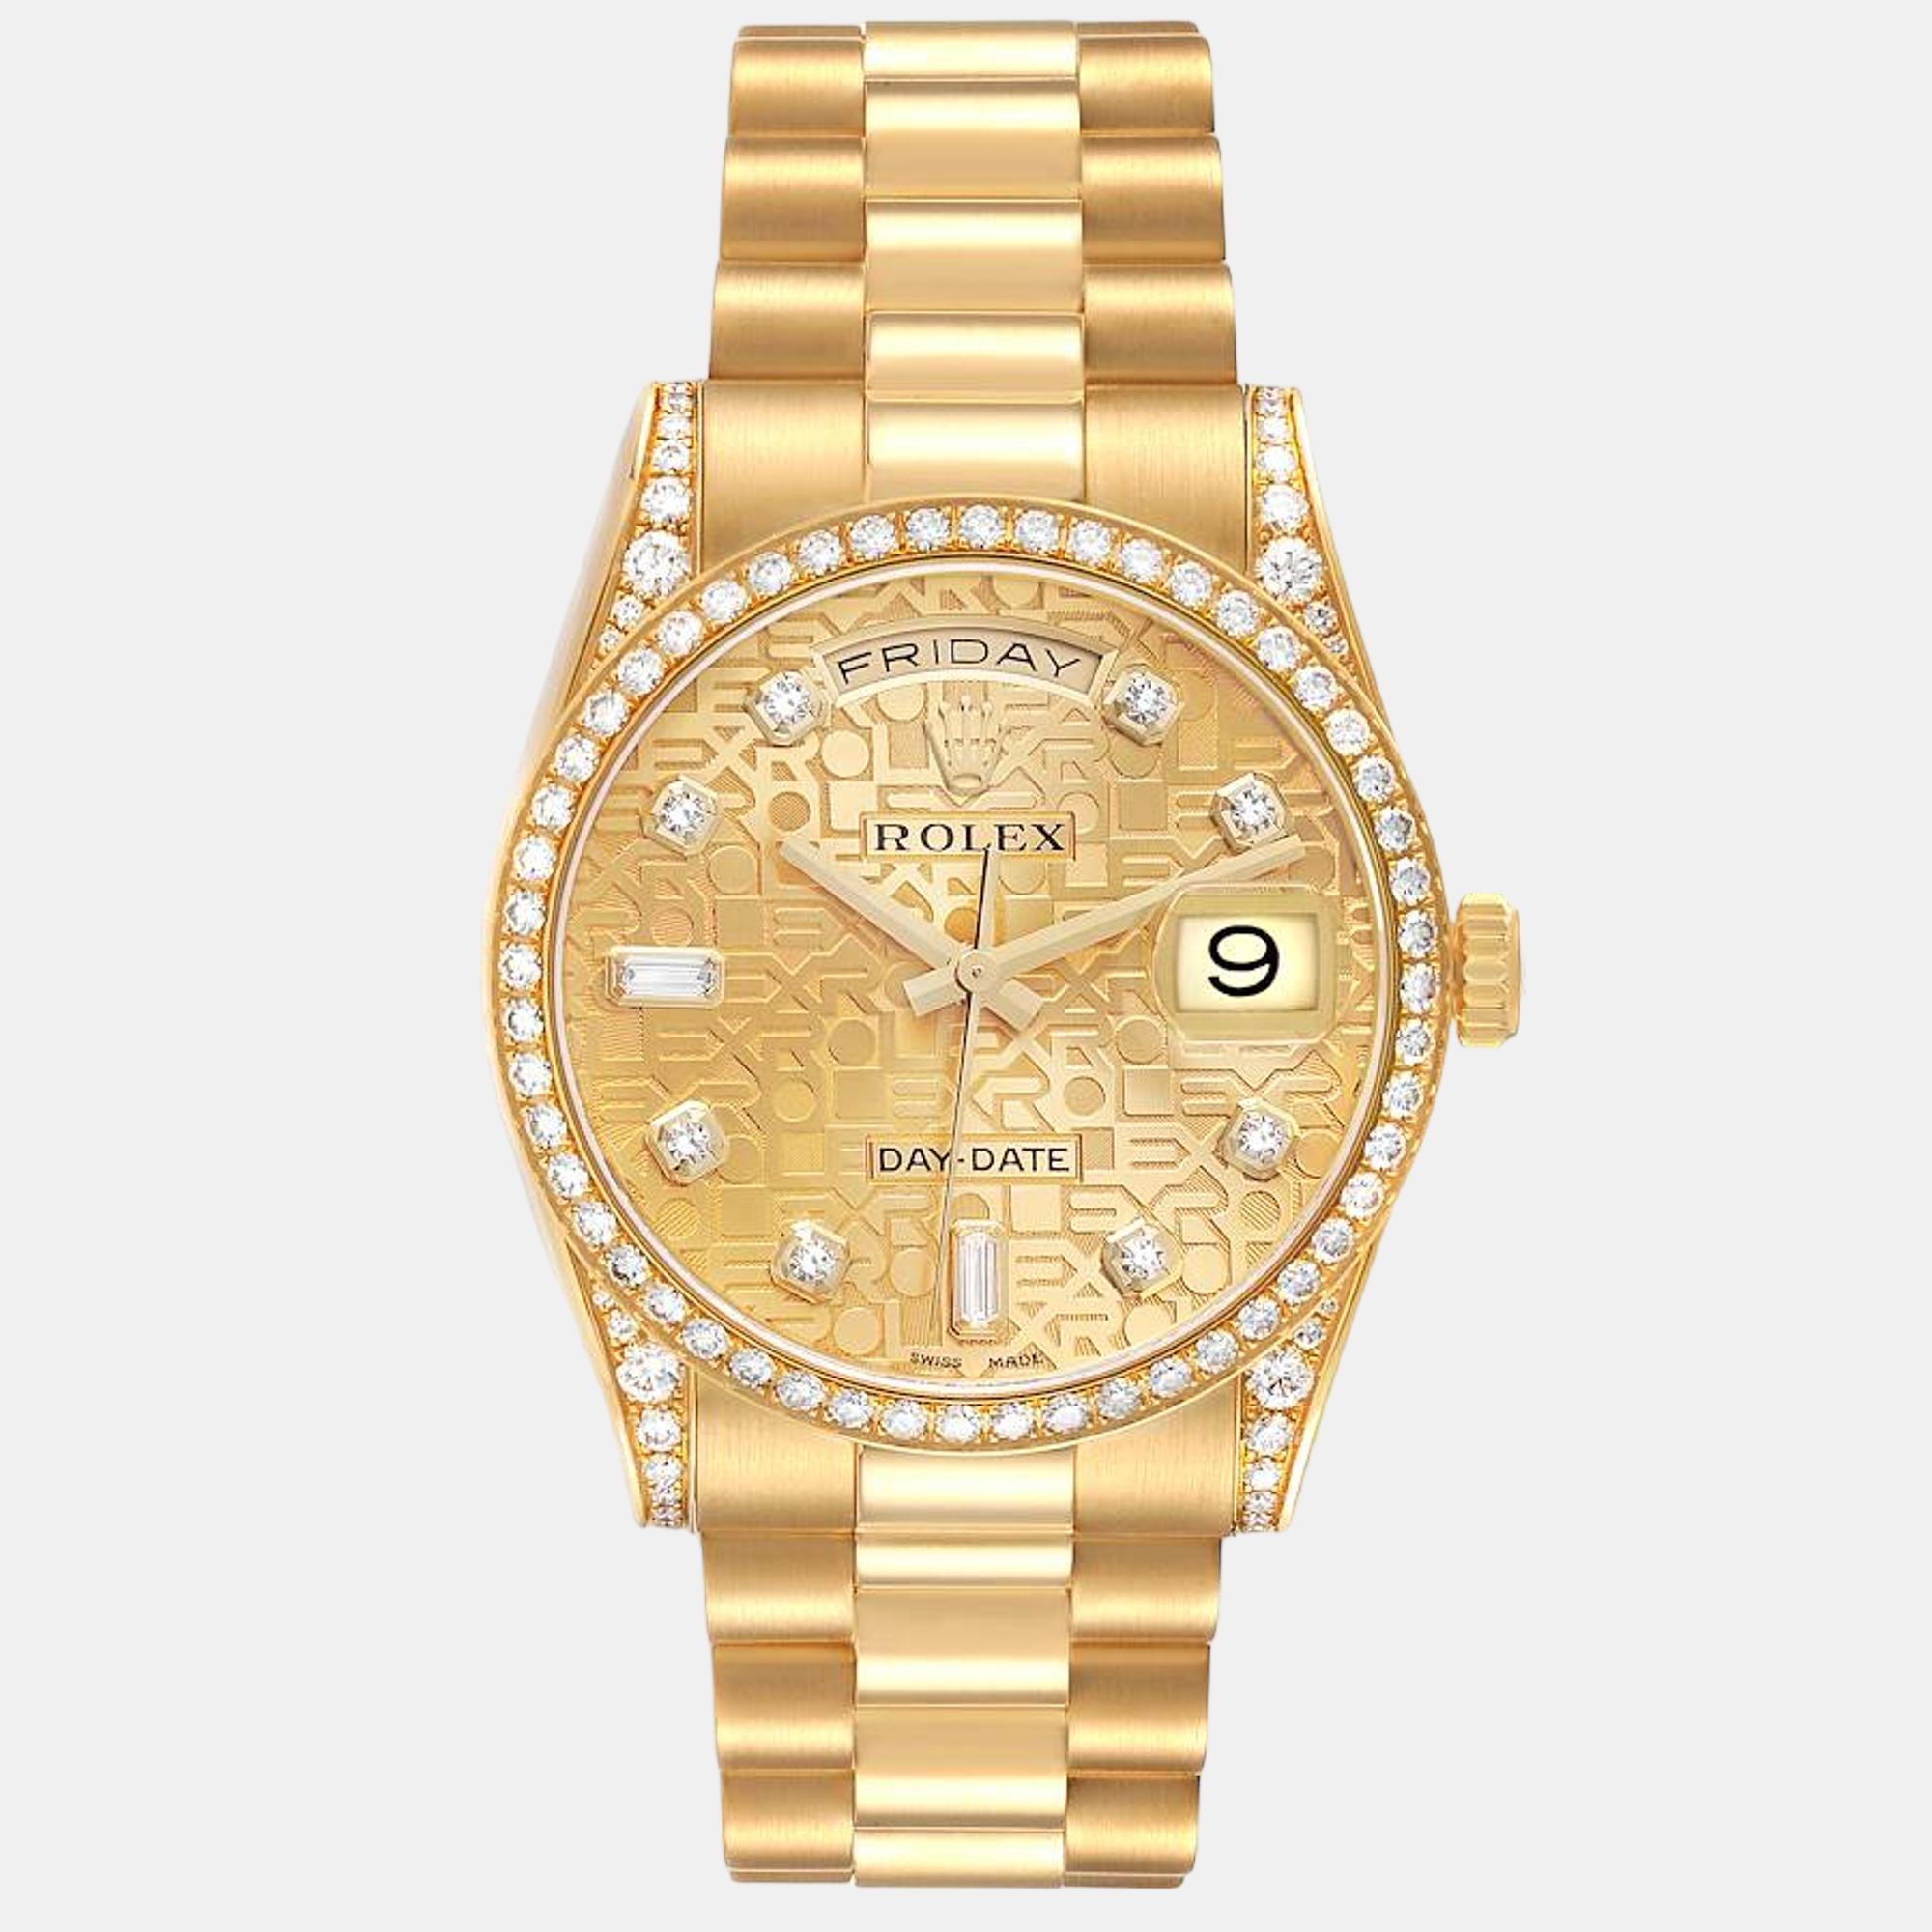 Embrace opulence with an authentic Rolex timepiece. A masterpiece of craftsmanship it exudes elegance with its iconic design Swiss precision and exquisite materials keeping your style always classy.